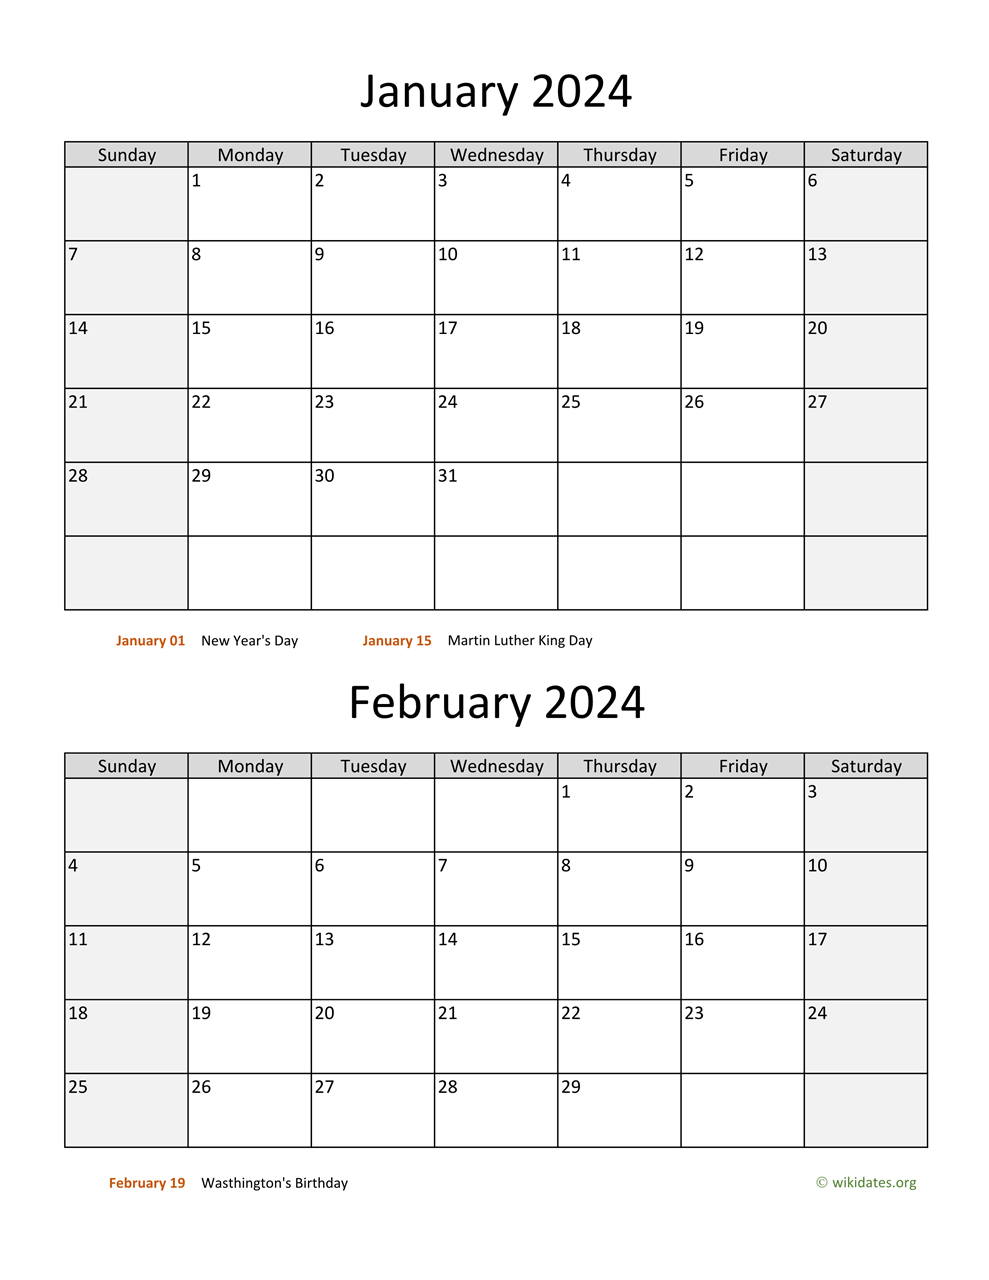 January And February 2024 Calendar | Wikidates for January And February 2024 Printable Calendar